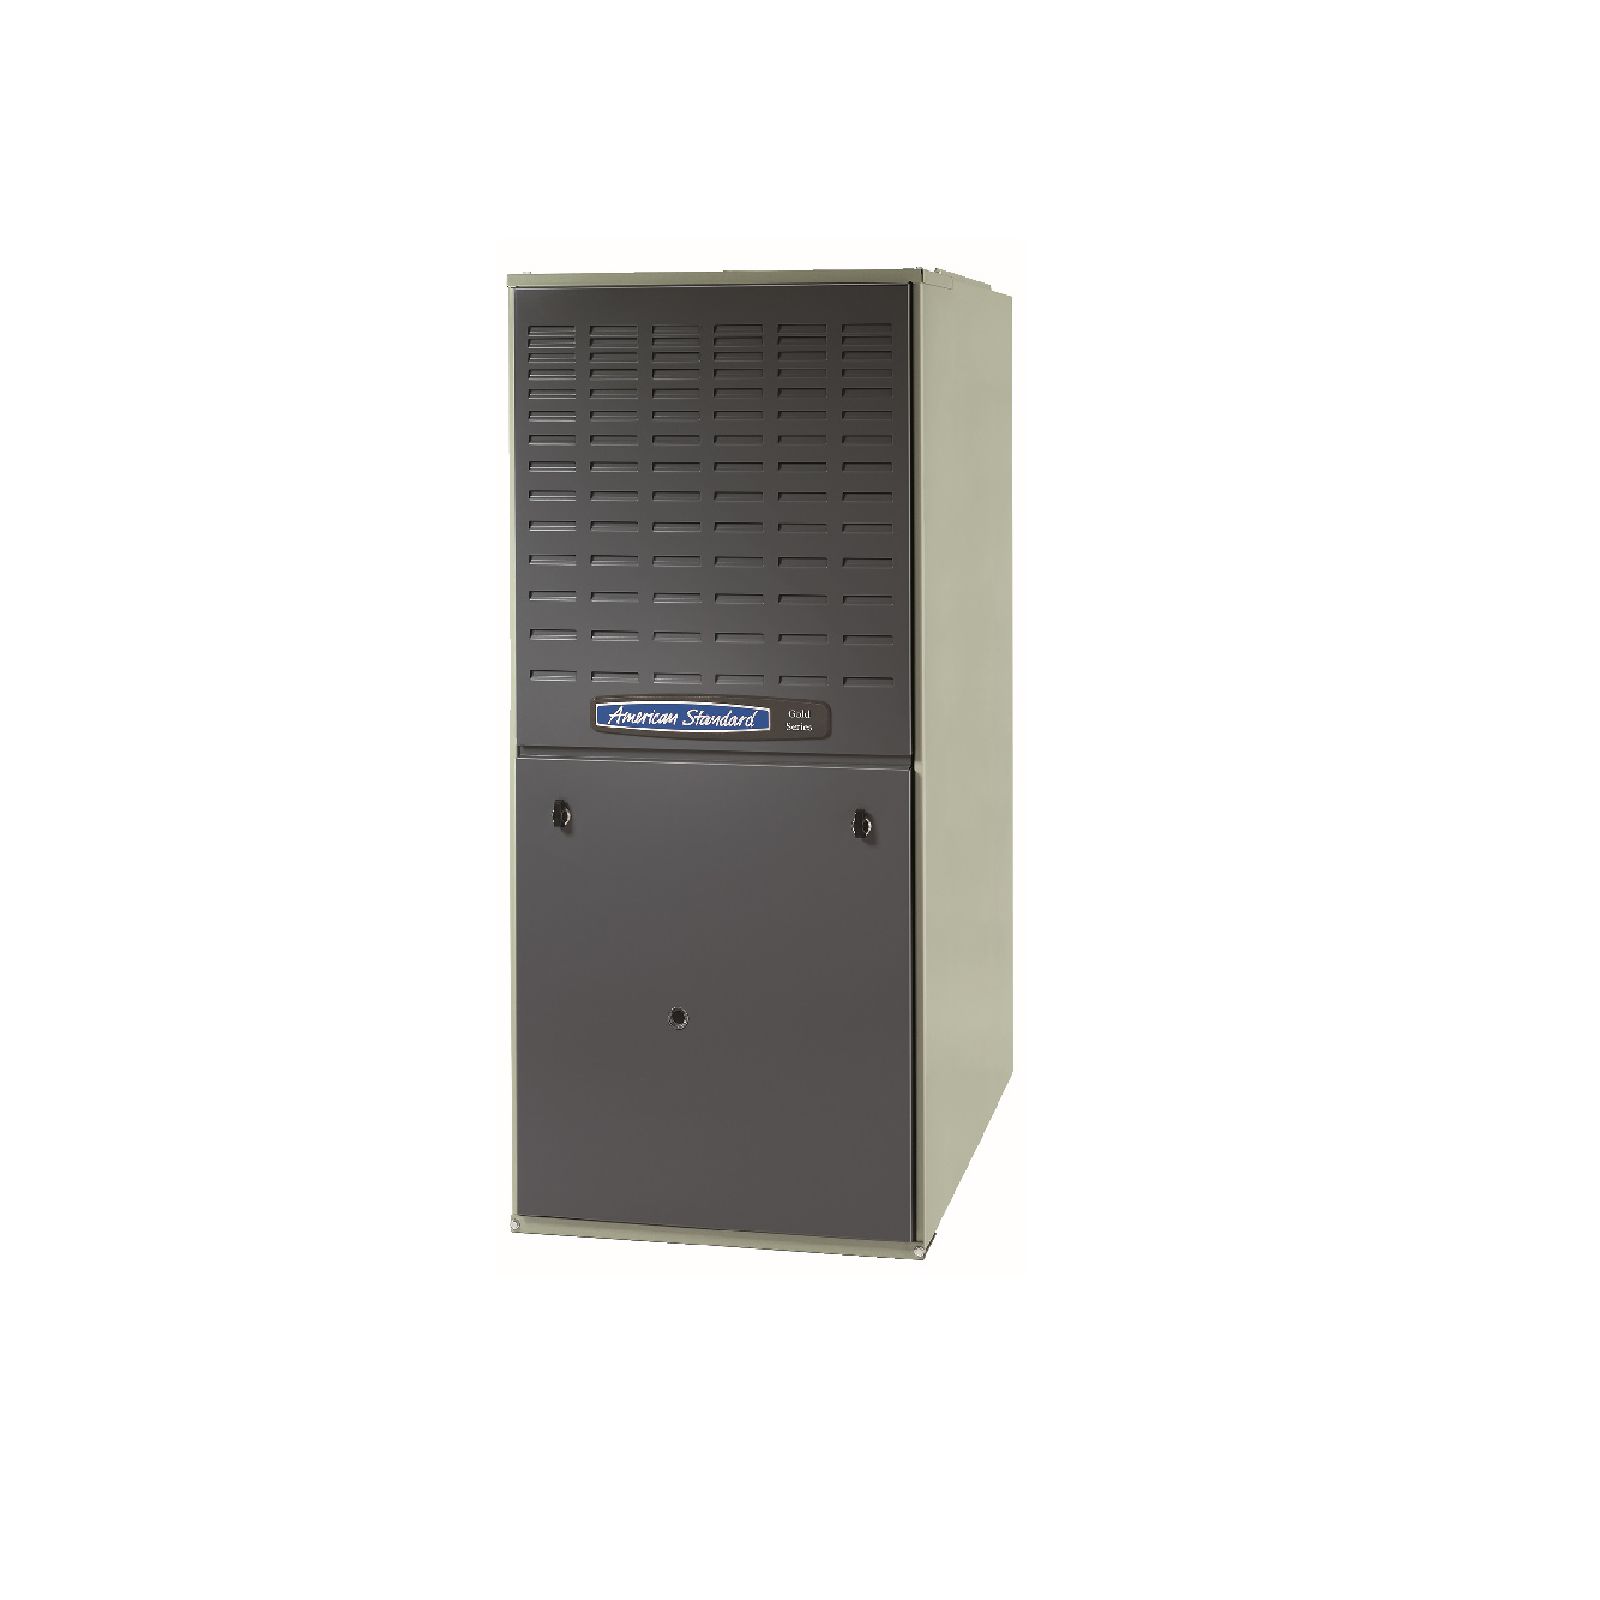 American Standard Heating & Air Conditioning 80% Upflow Variable Speed  2 Stage 60000 BTU Furnace 40503